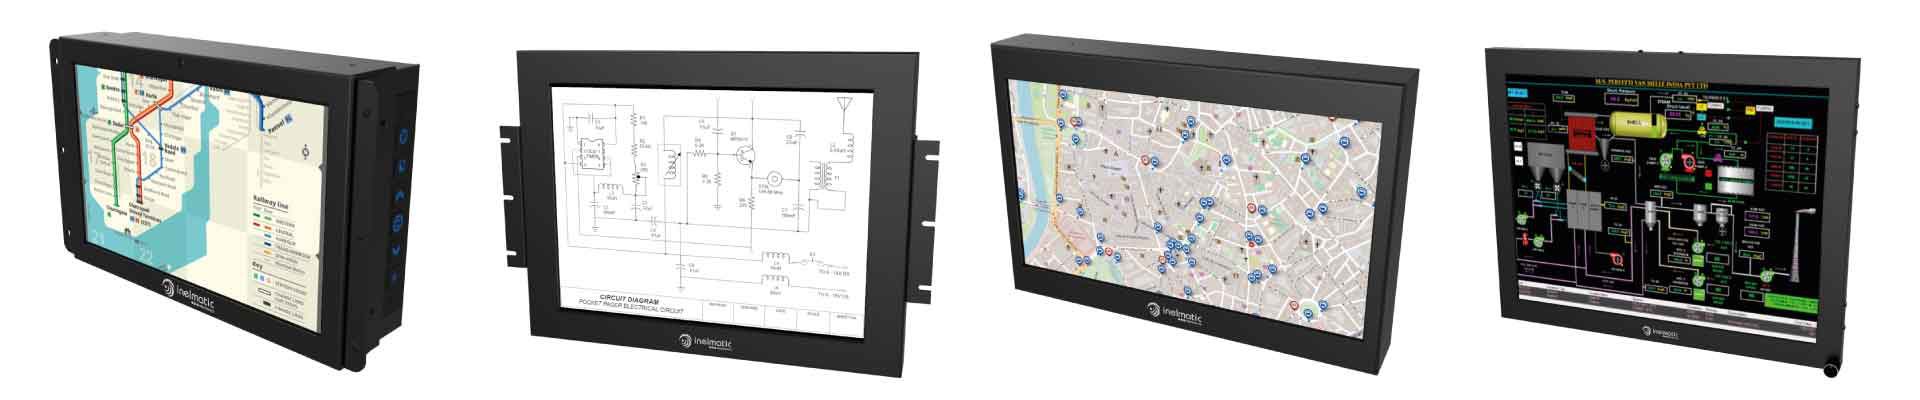 Stand alone & embedded military metal frame displays - Inelmatic